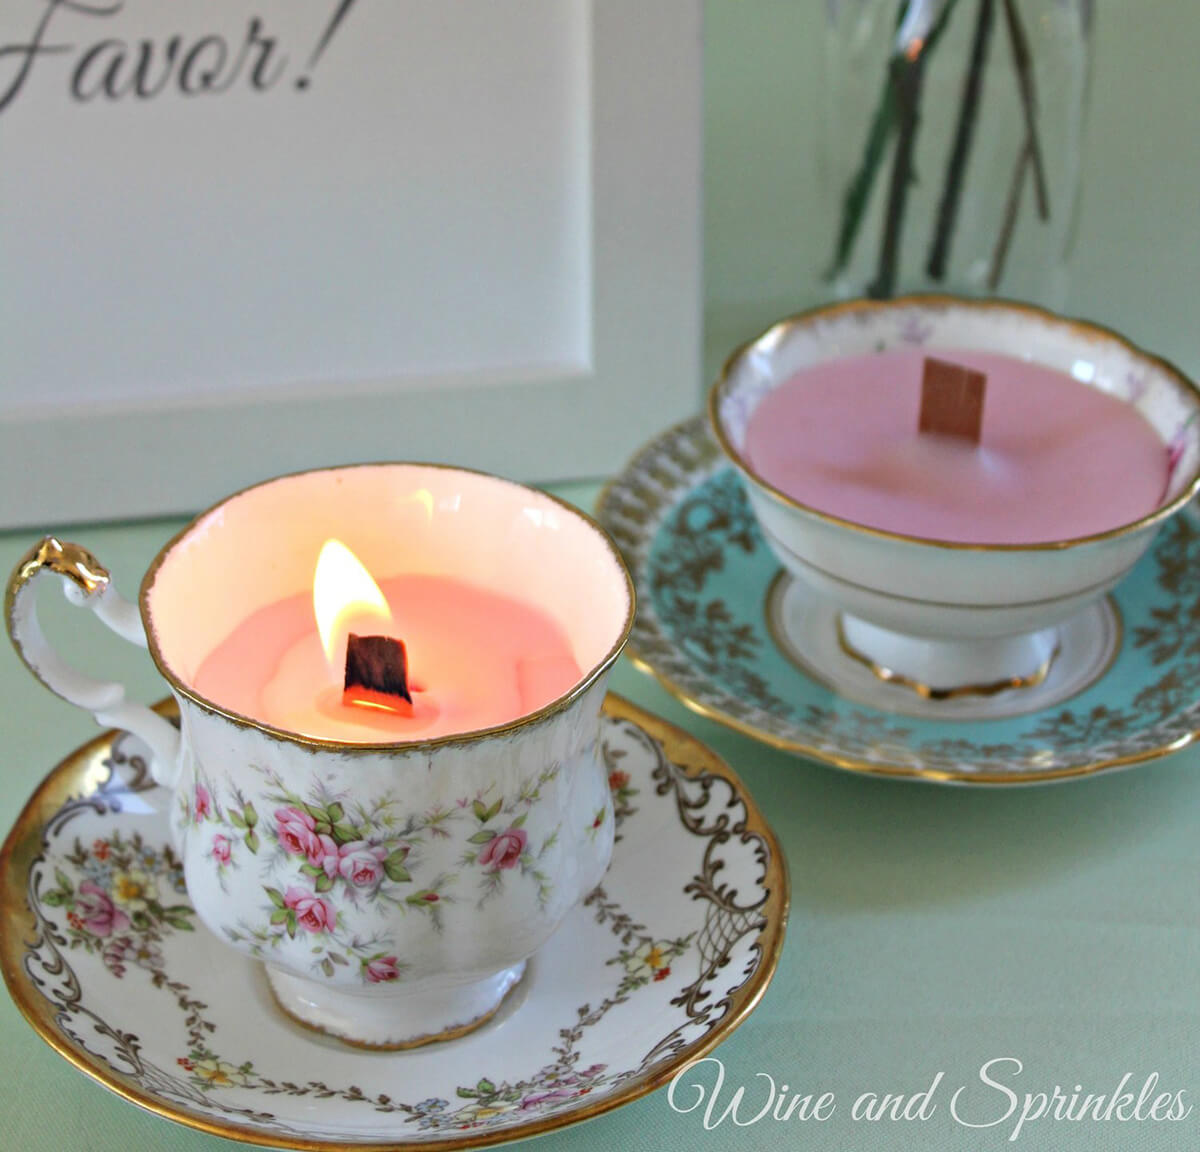 Do it yourself, Wood Wick Teacup Candles